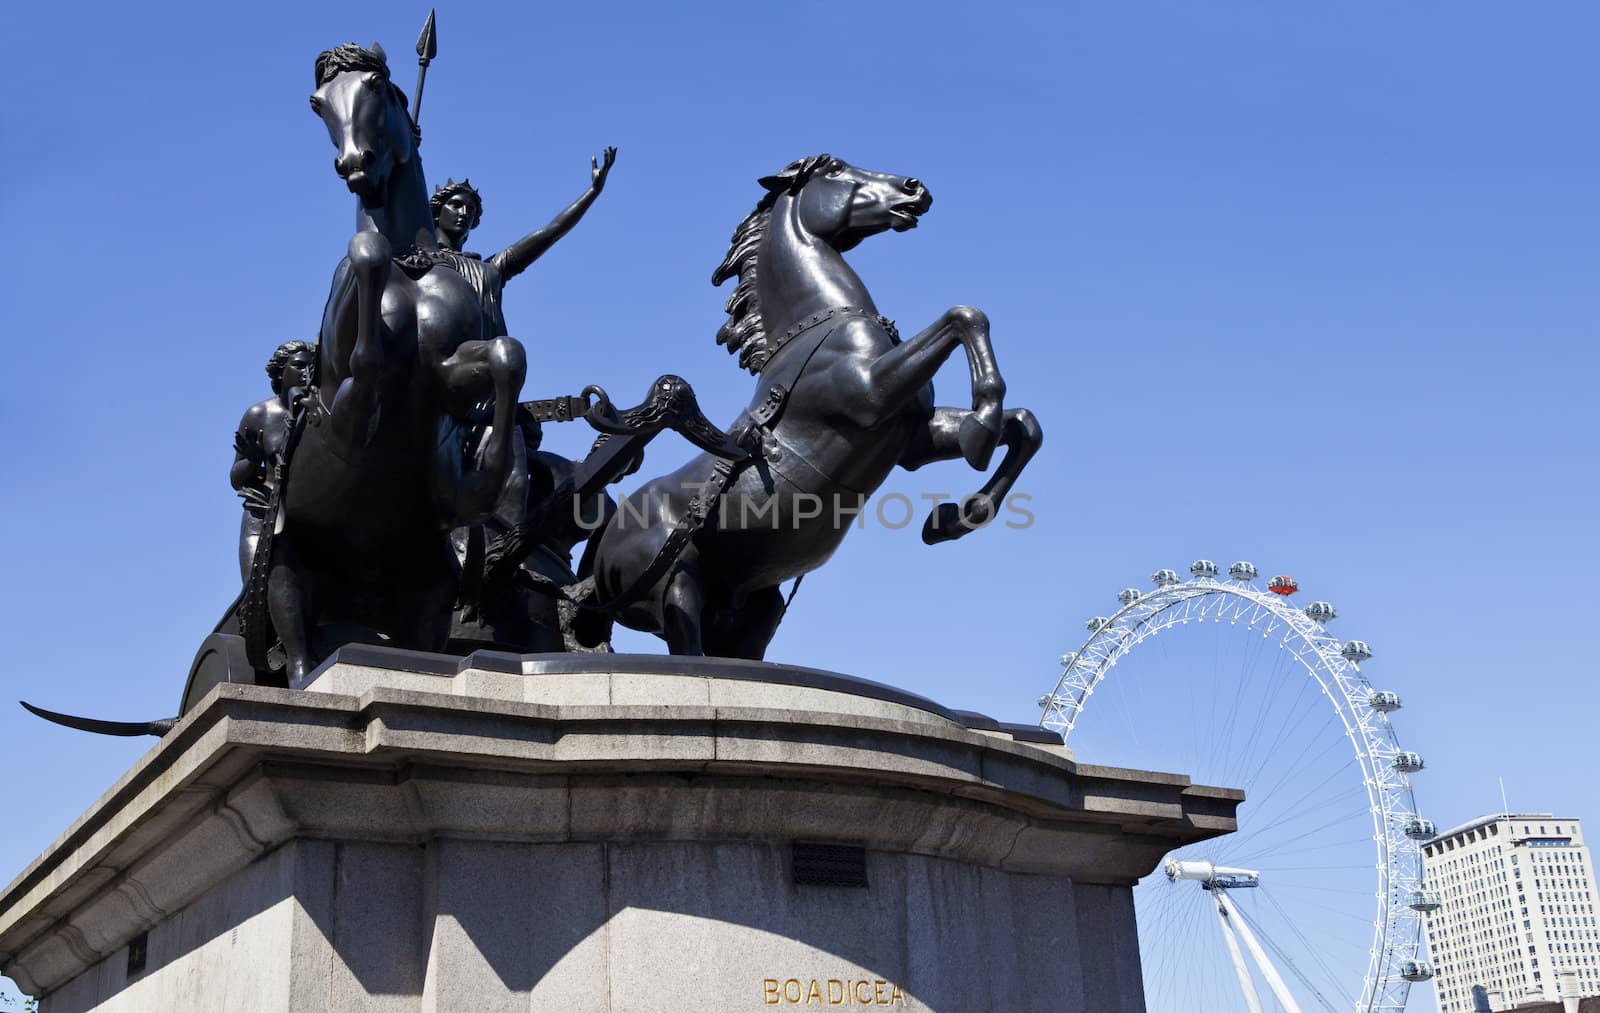 Queen Boudica/Boadicea Statue and the London Eye in Westminster.